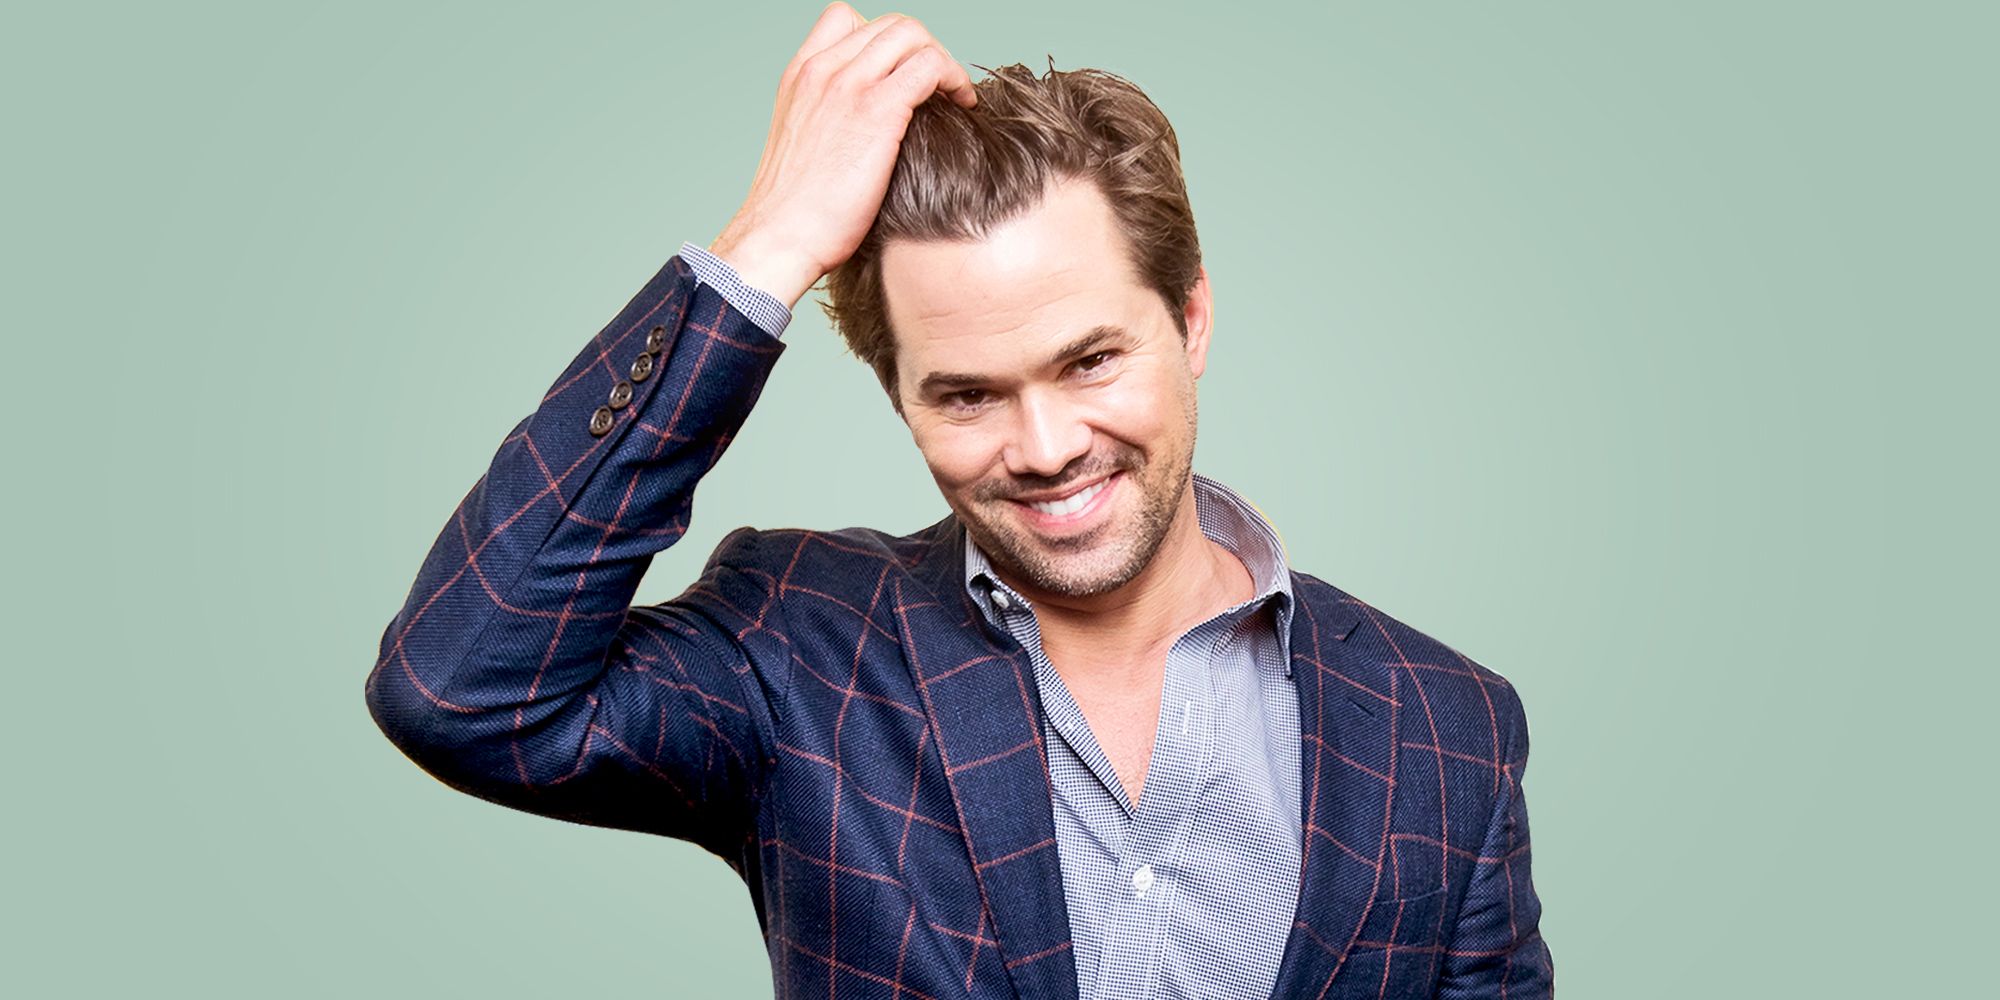 Andrew Rannells Discusses Boys In the Band, His Boyfriend Tuc Watkins, Big Mouth, and More pic